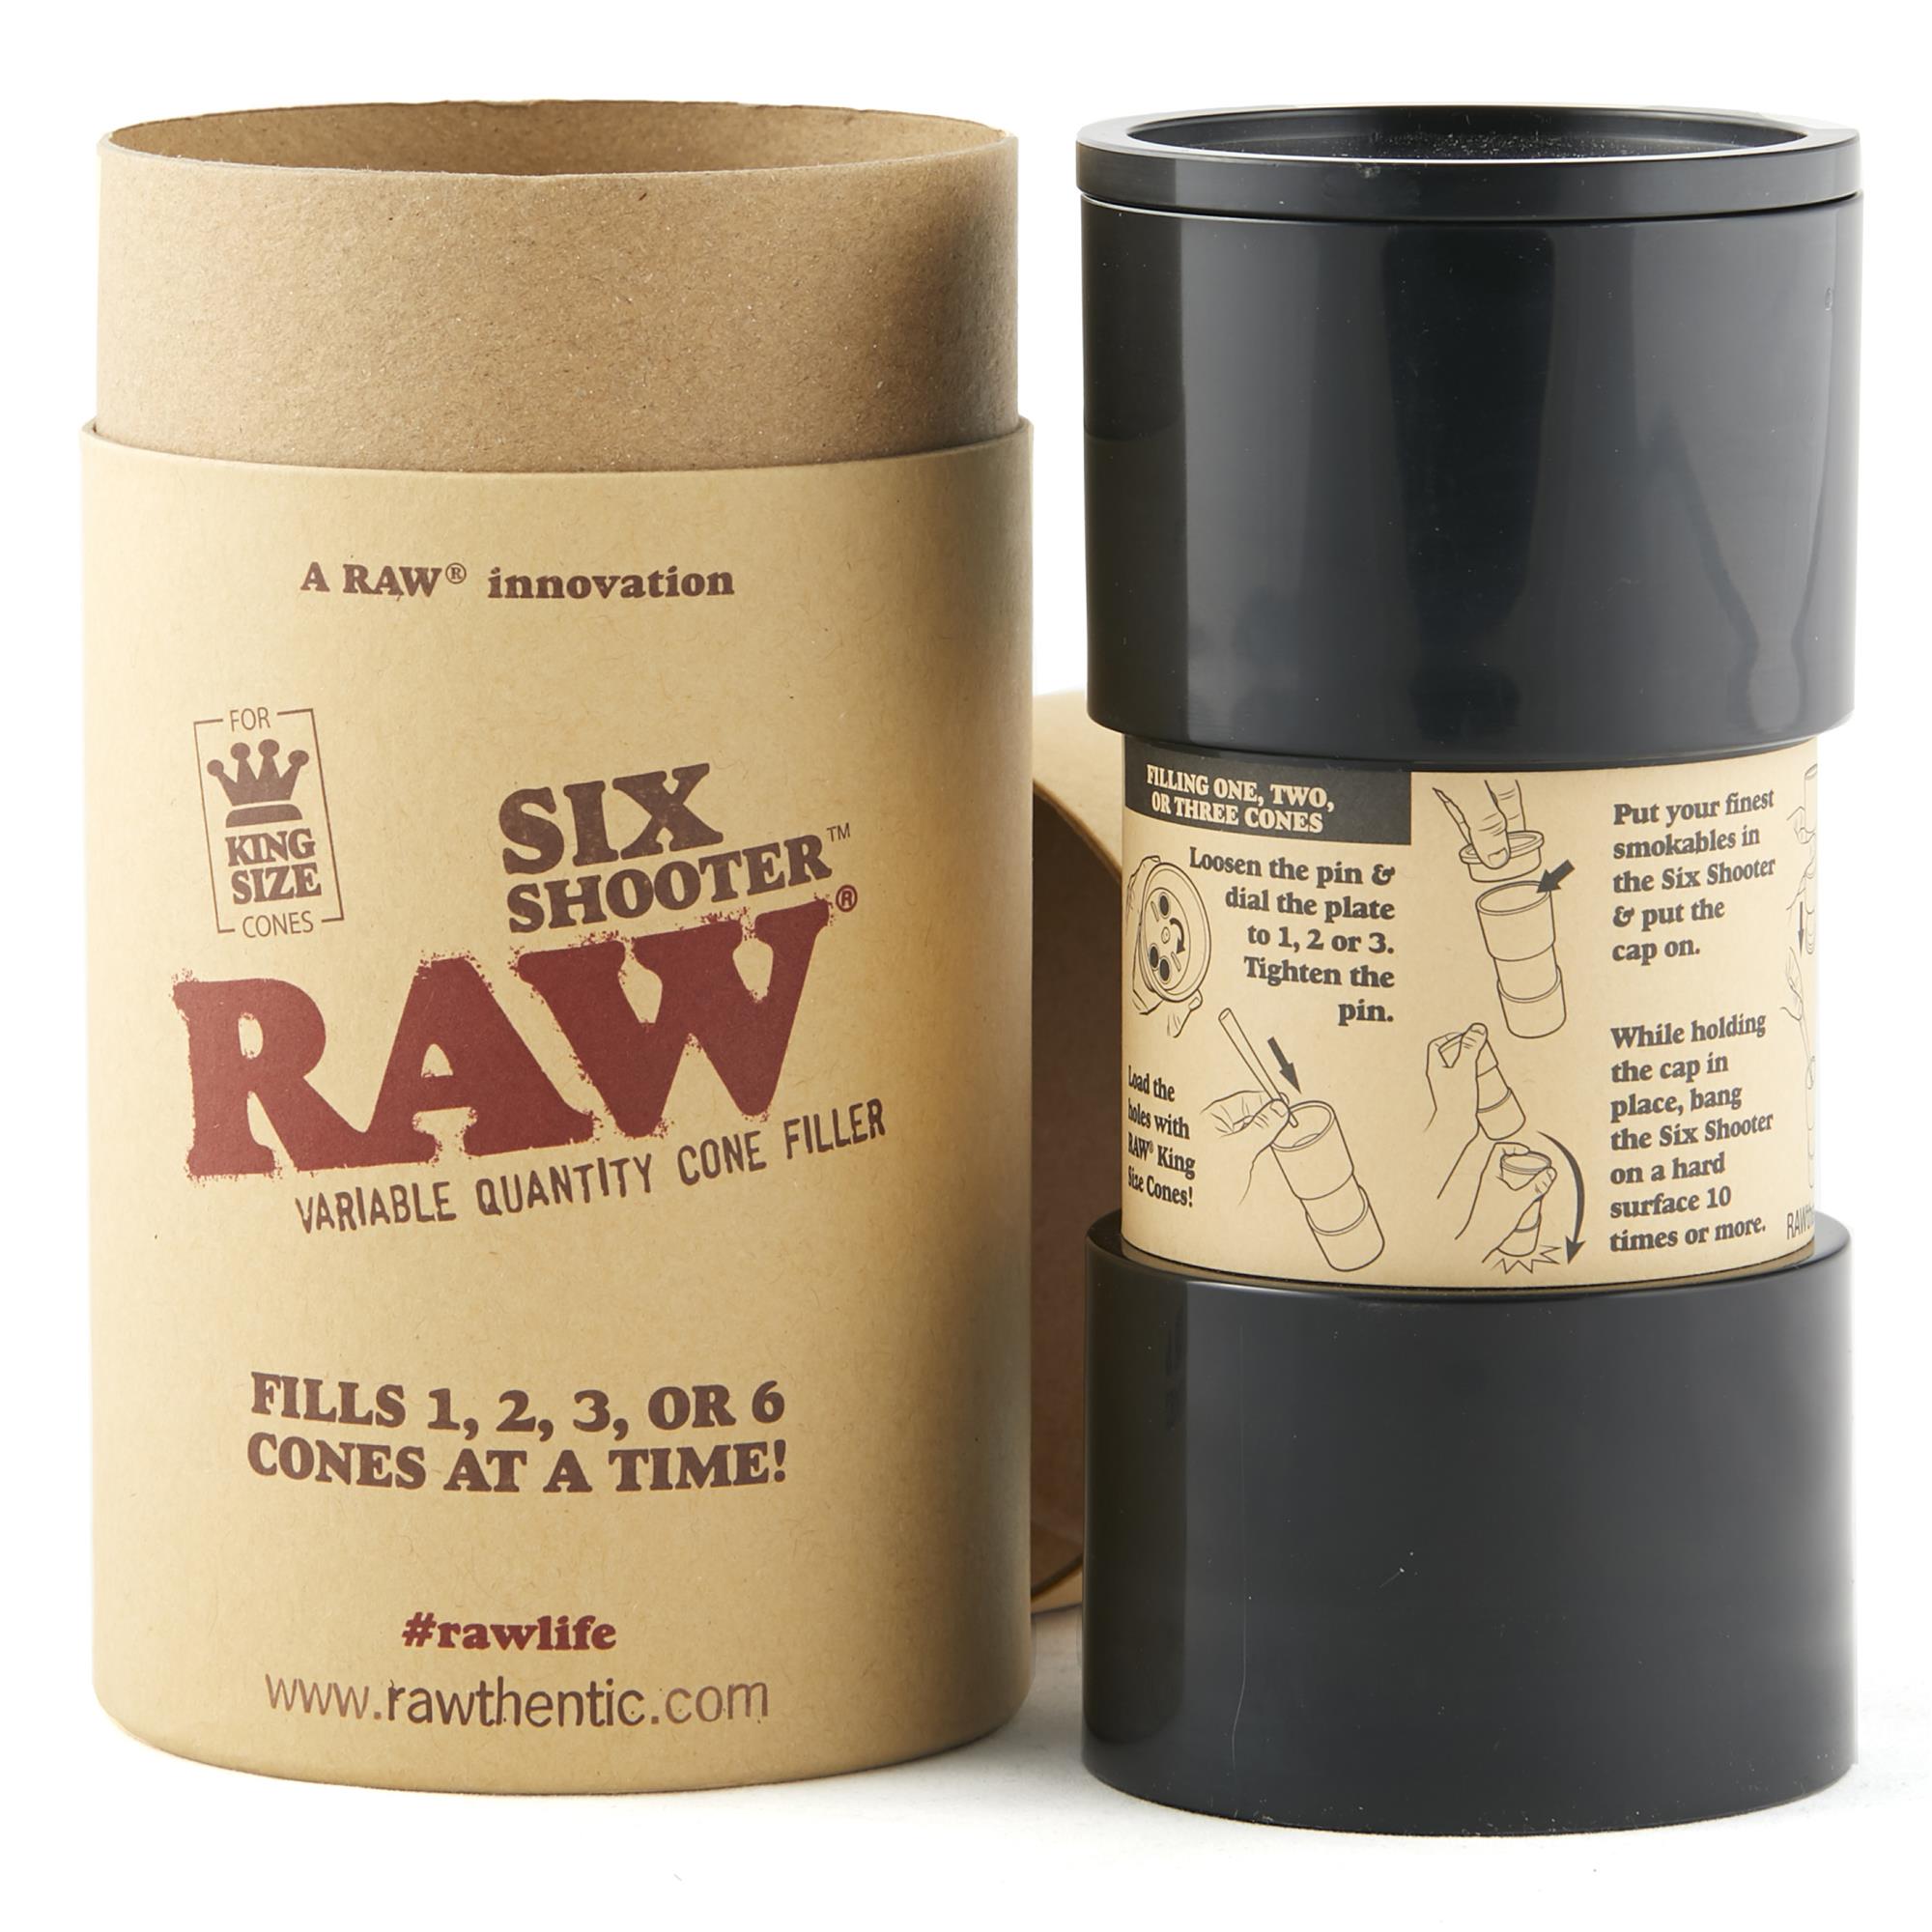 RAW SIX SHOOTER KING SIZE CONE FILLER